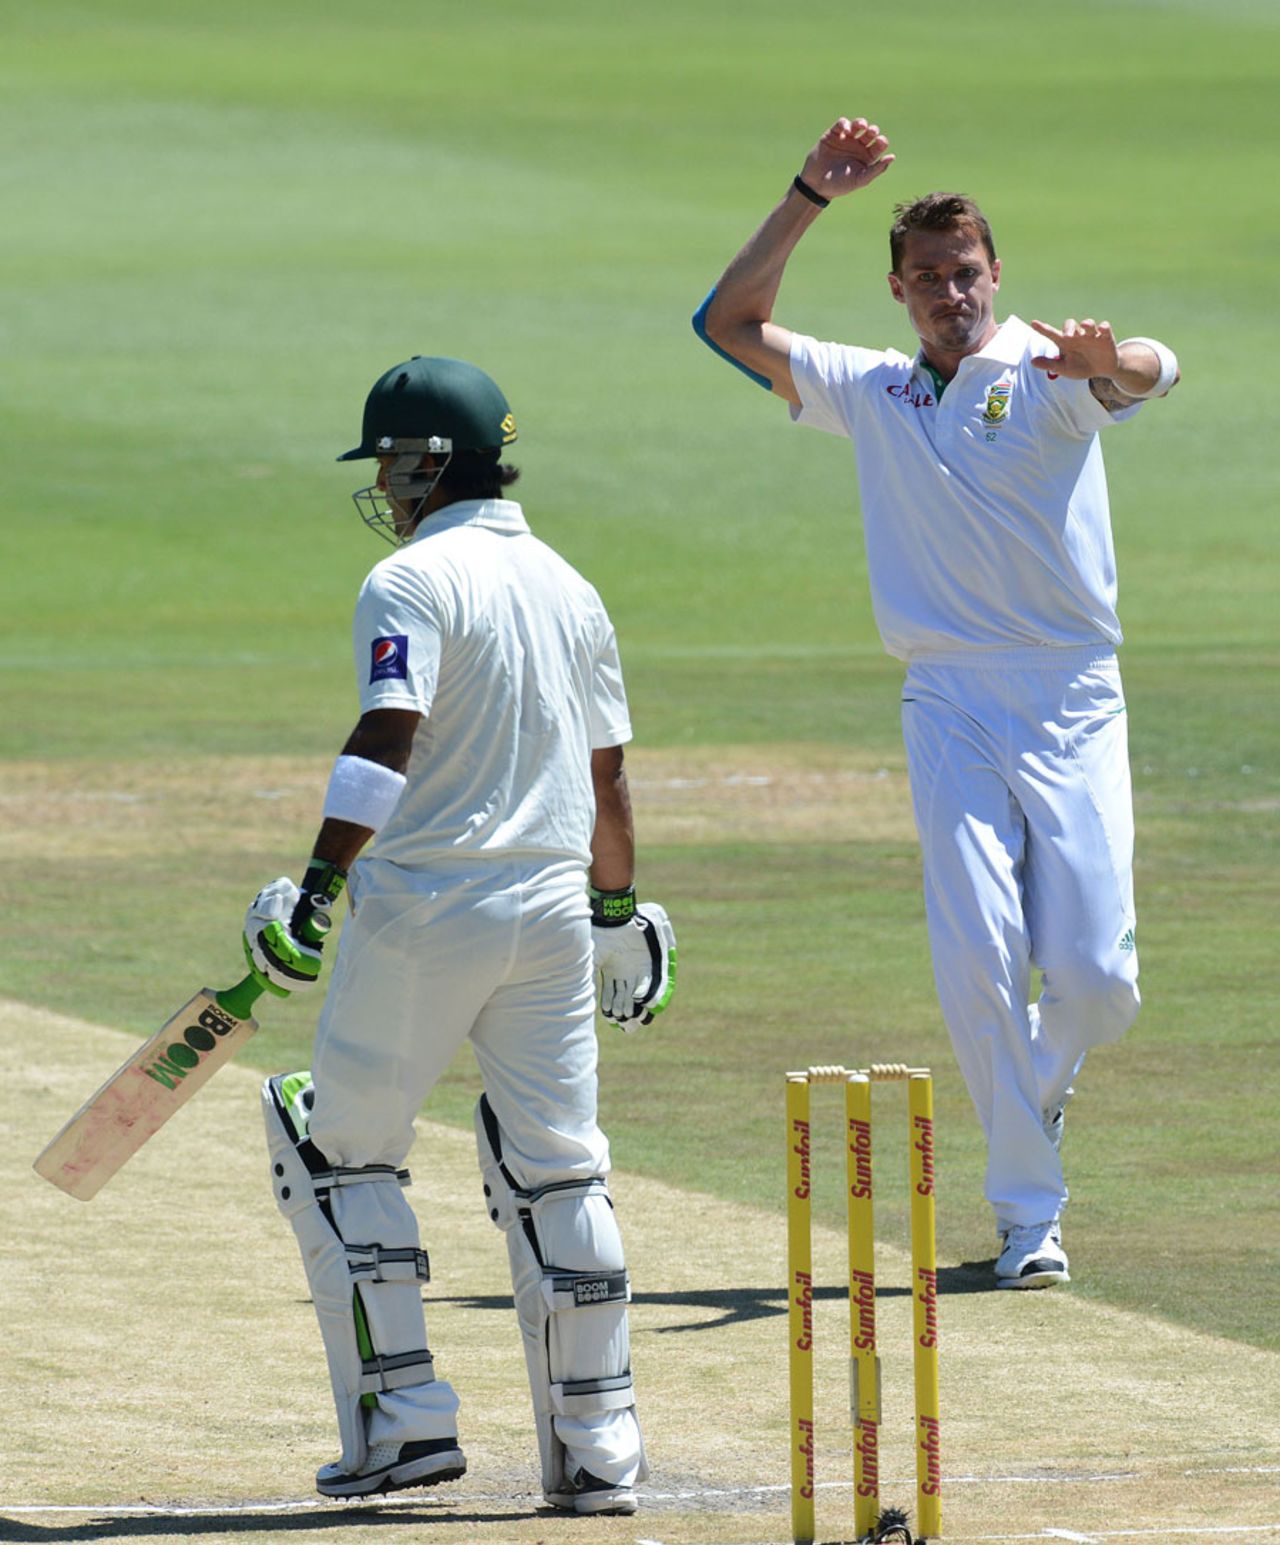 Dale Steyn removed Mohammad Hafeez in the second over of the morning, South Africa v Pakistan, 1st Test, Johannesburg, 2nd day, February 2, 2013